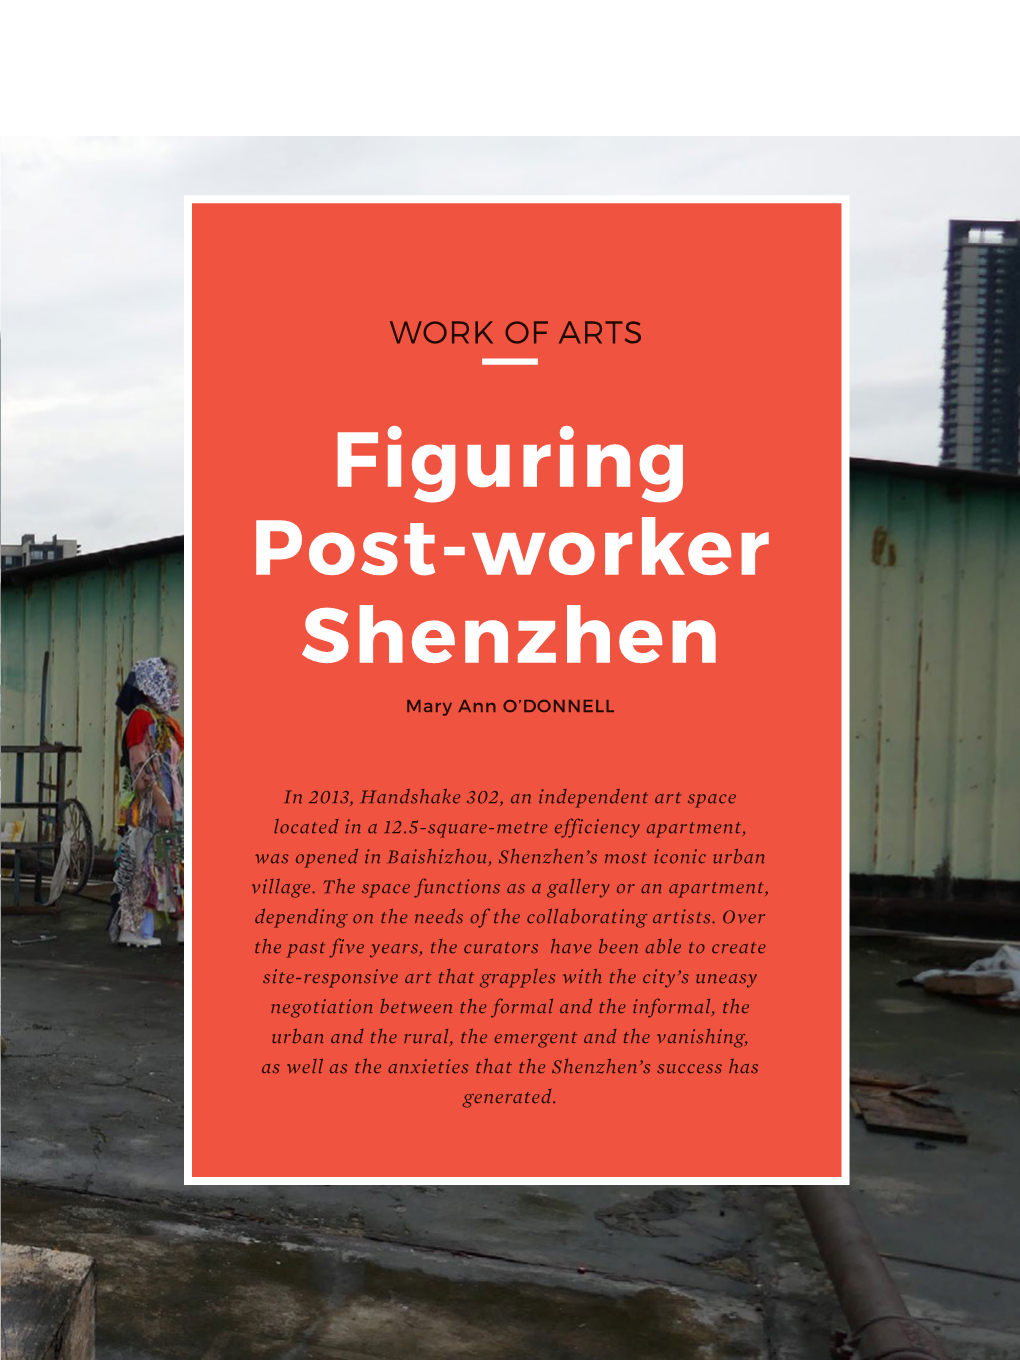 Figuring Post-Worker Shenzhen Mary Ann O’DONNELL